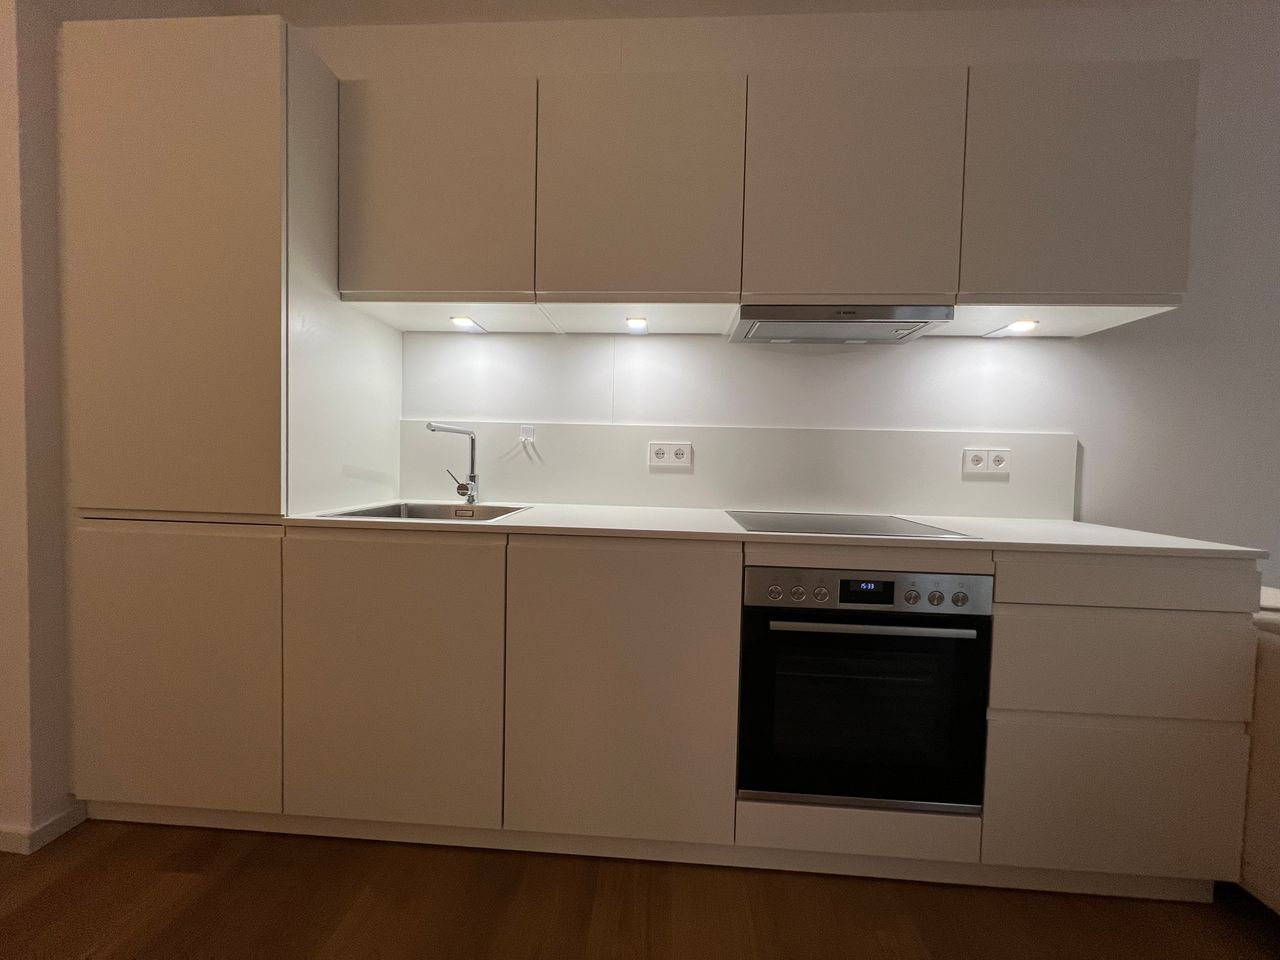 NEW BUILD, first occupancy, furnished 2-room apartment in TOP location with balcony in Berlin, KfW 55